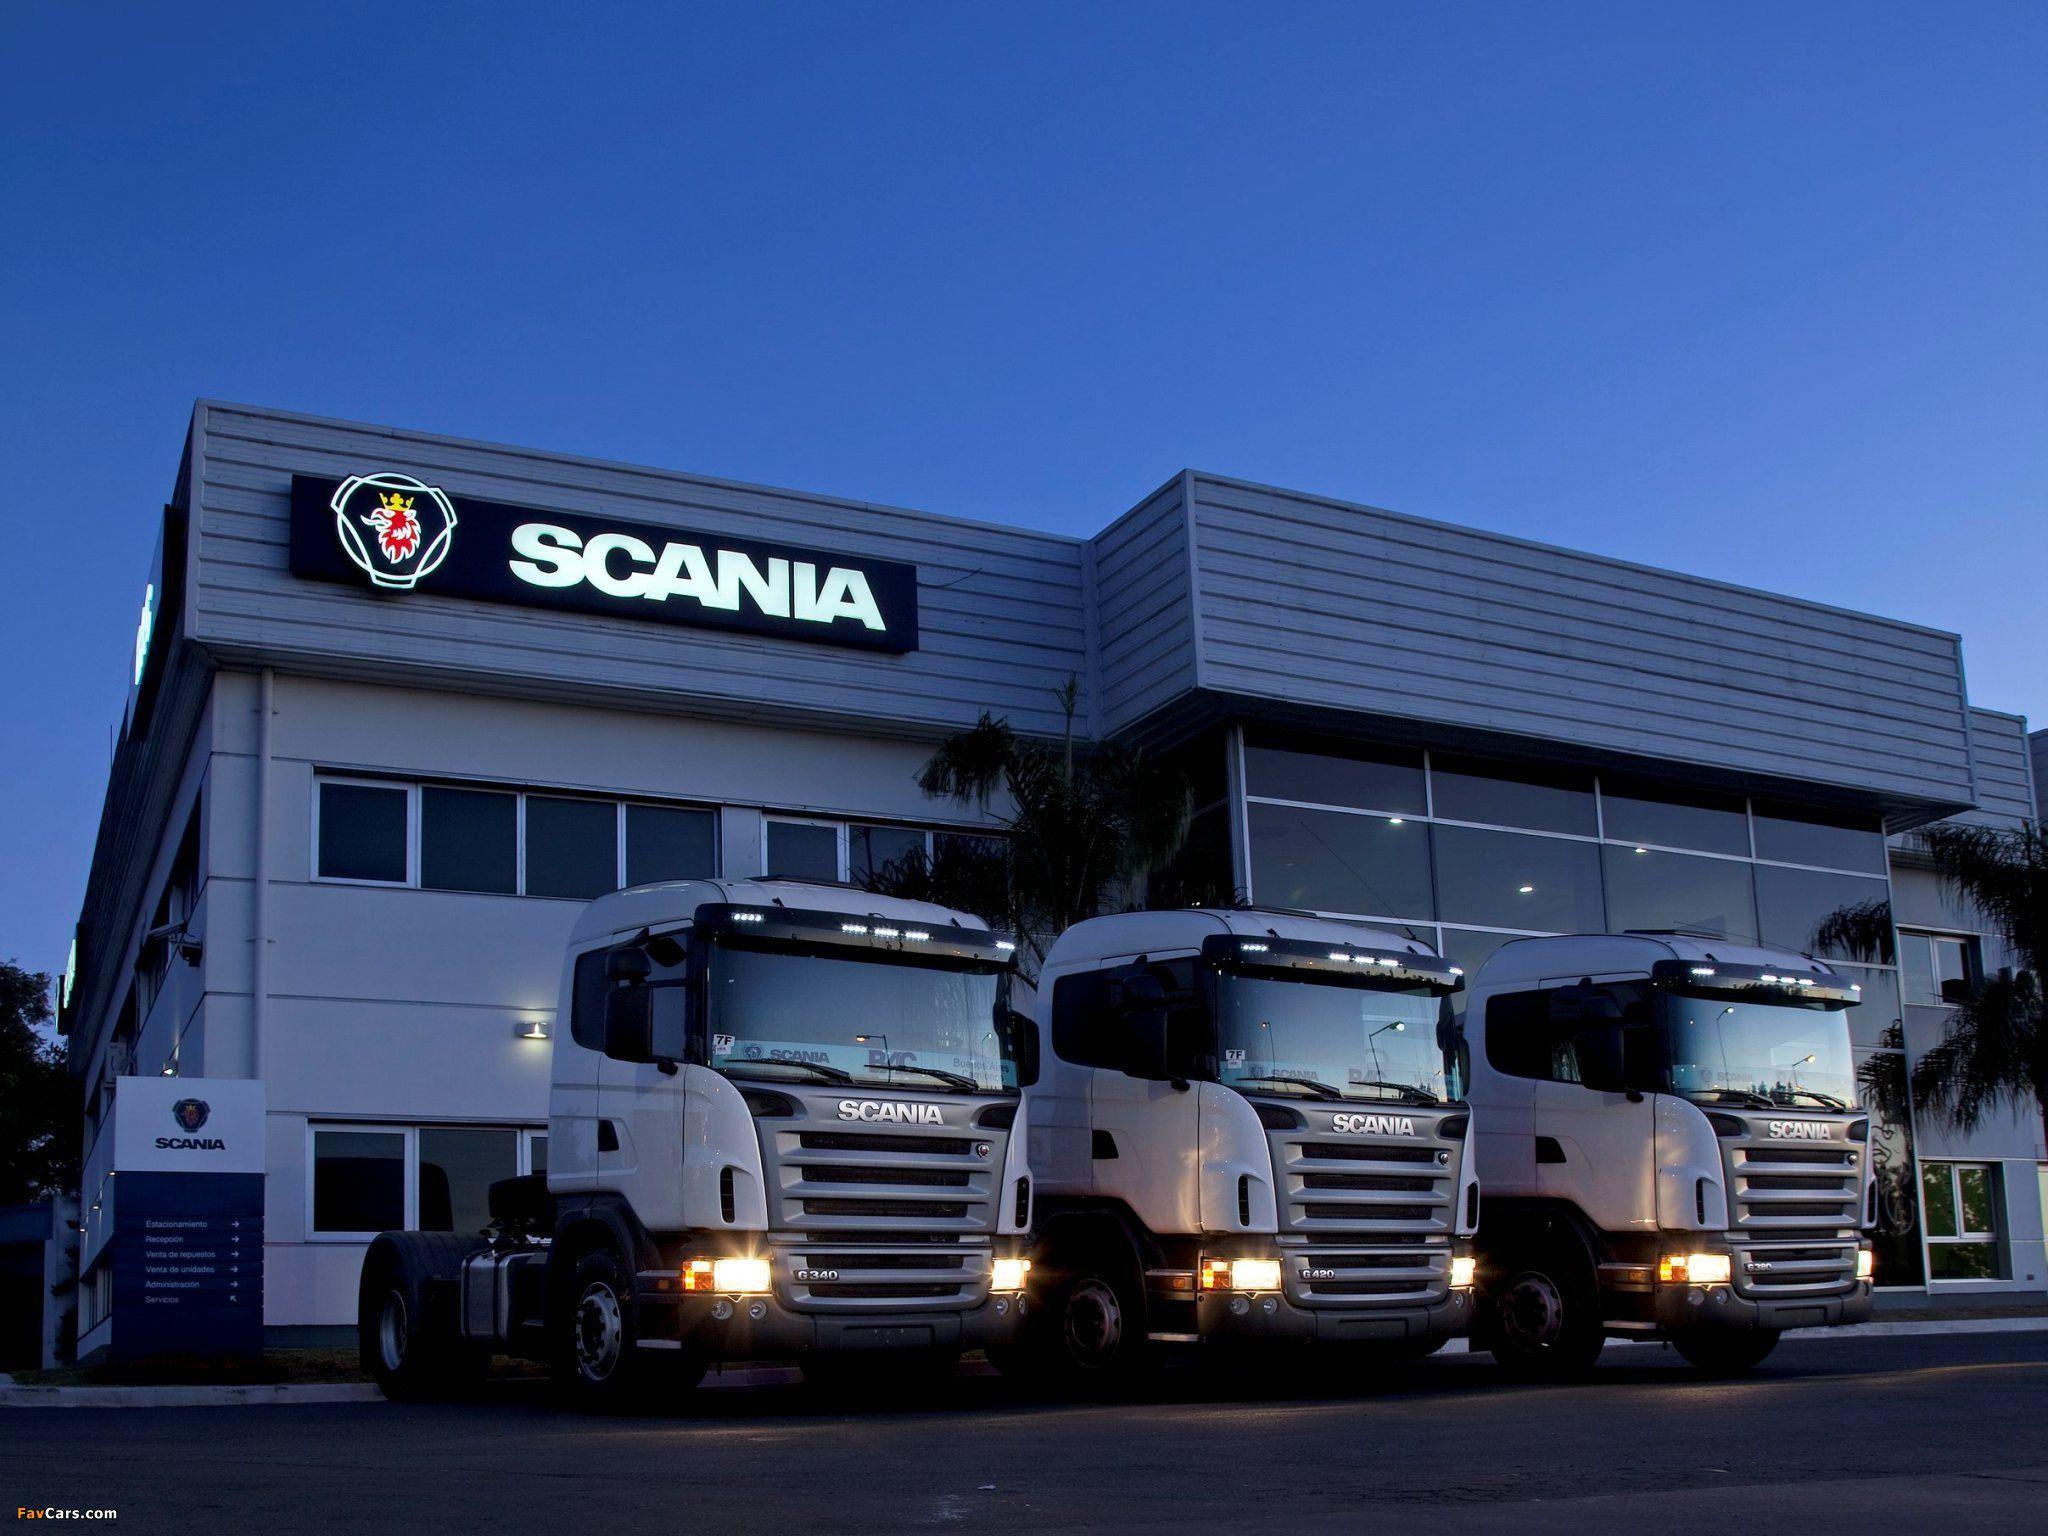 Scania Wallpaper, HD Scania Wallpaper. Scania Best Pics Collection